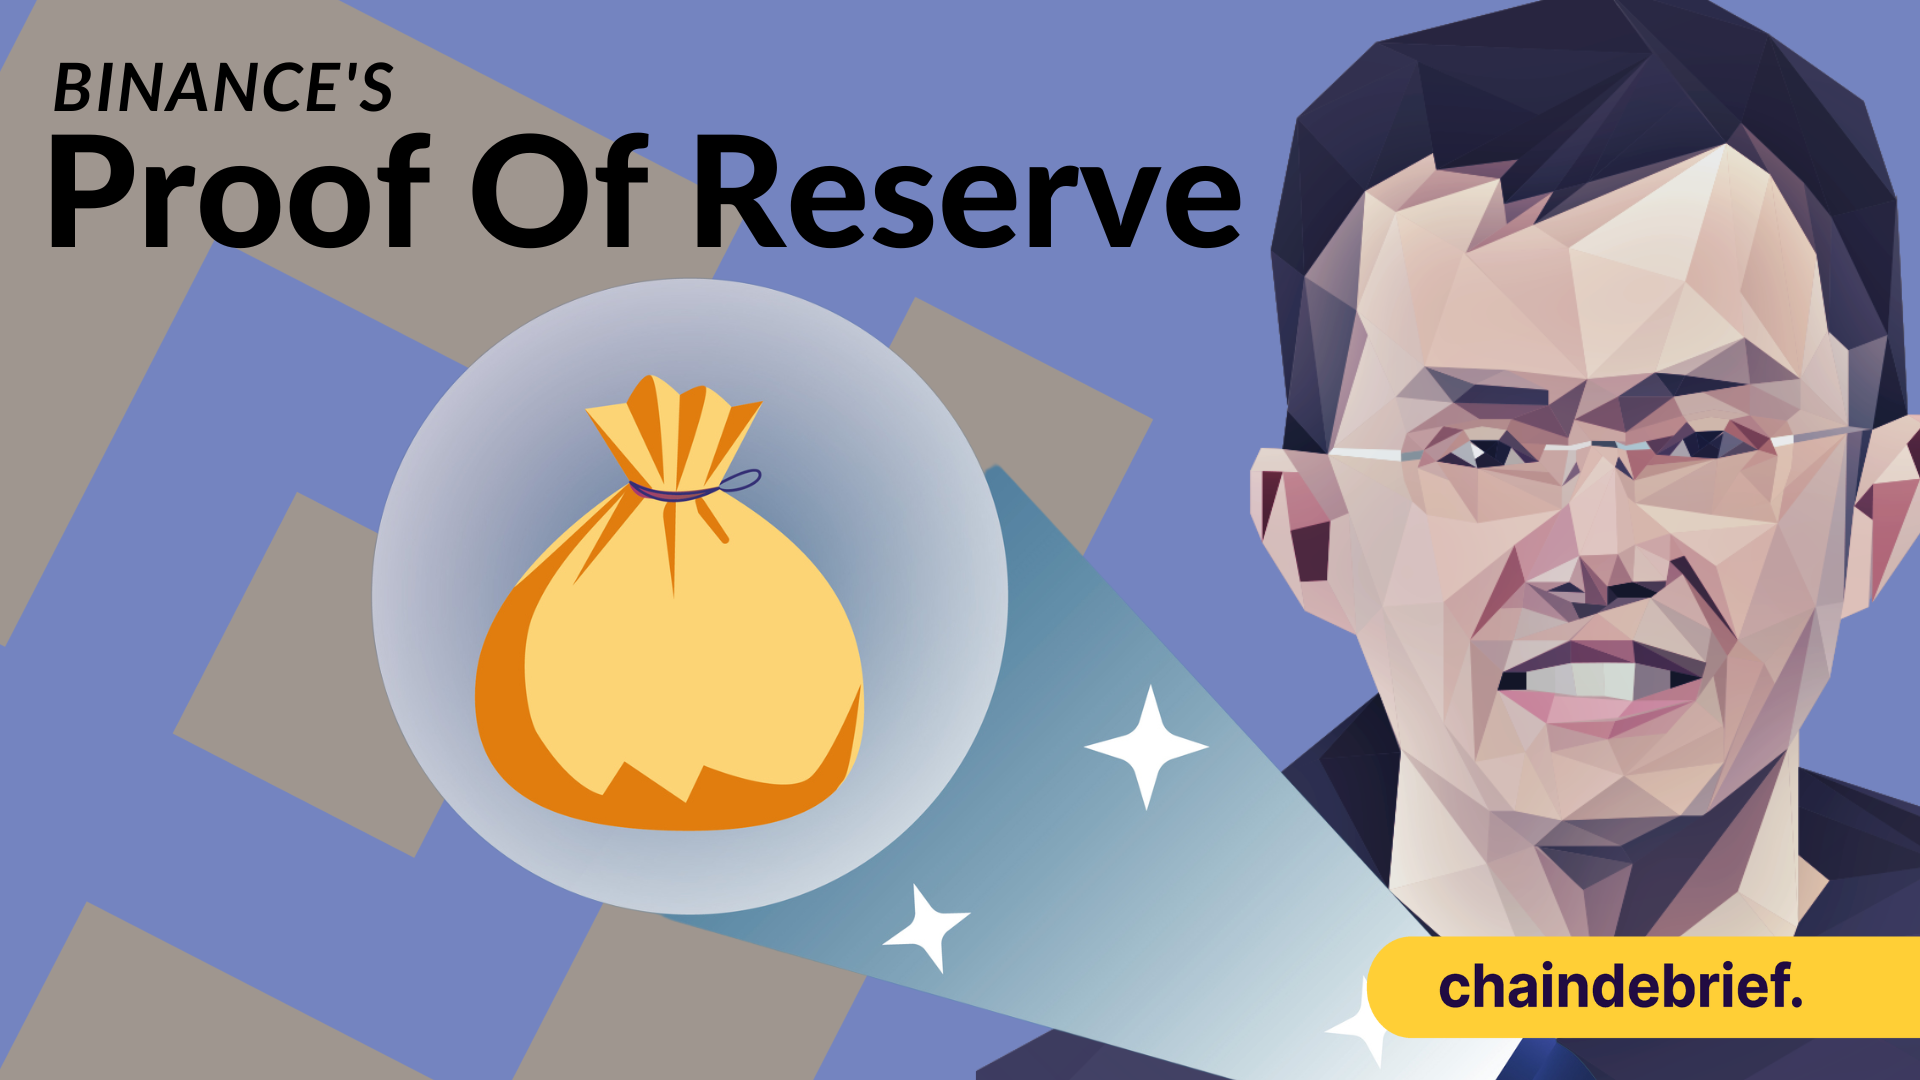 We Used On-Chain Data To Look Into Binance’s Proof Of Reserve